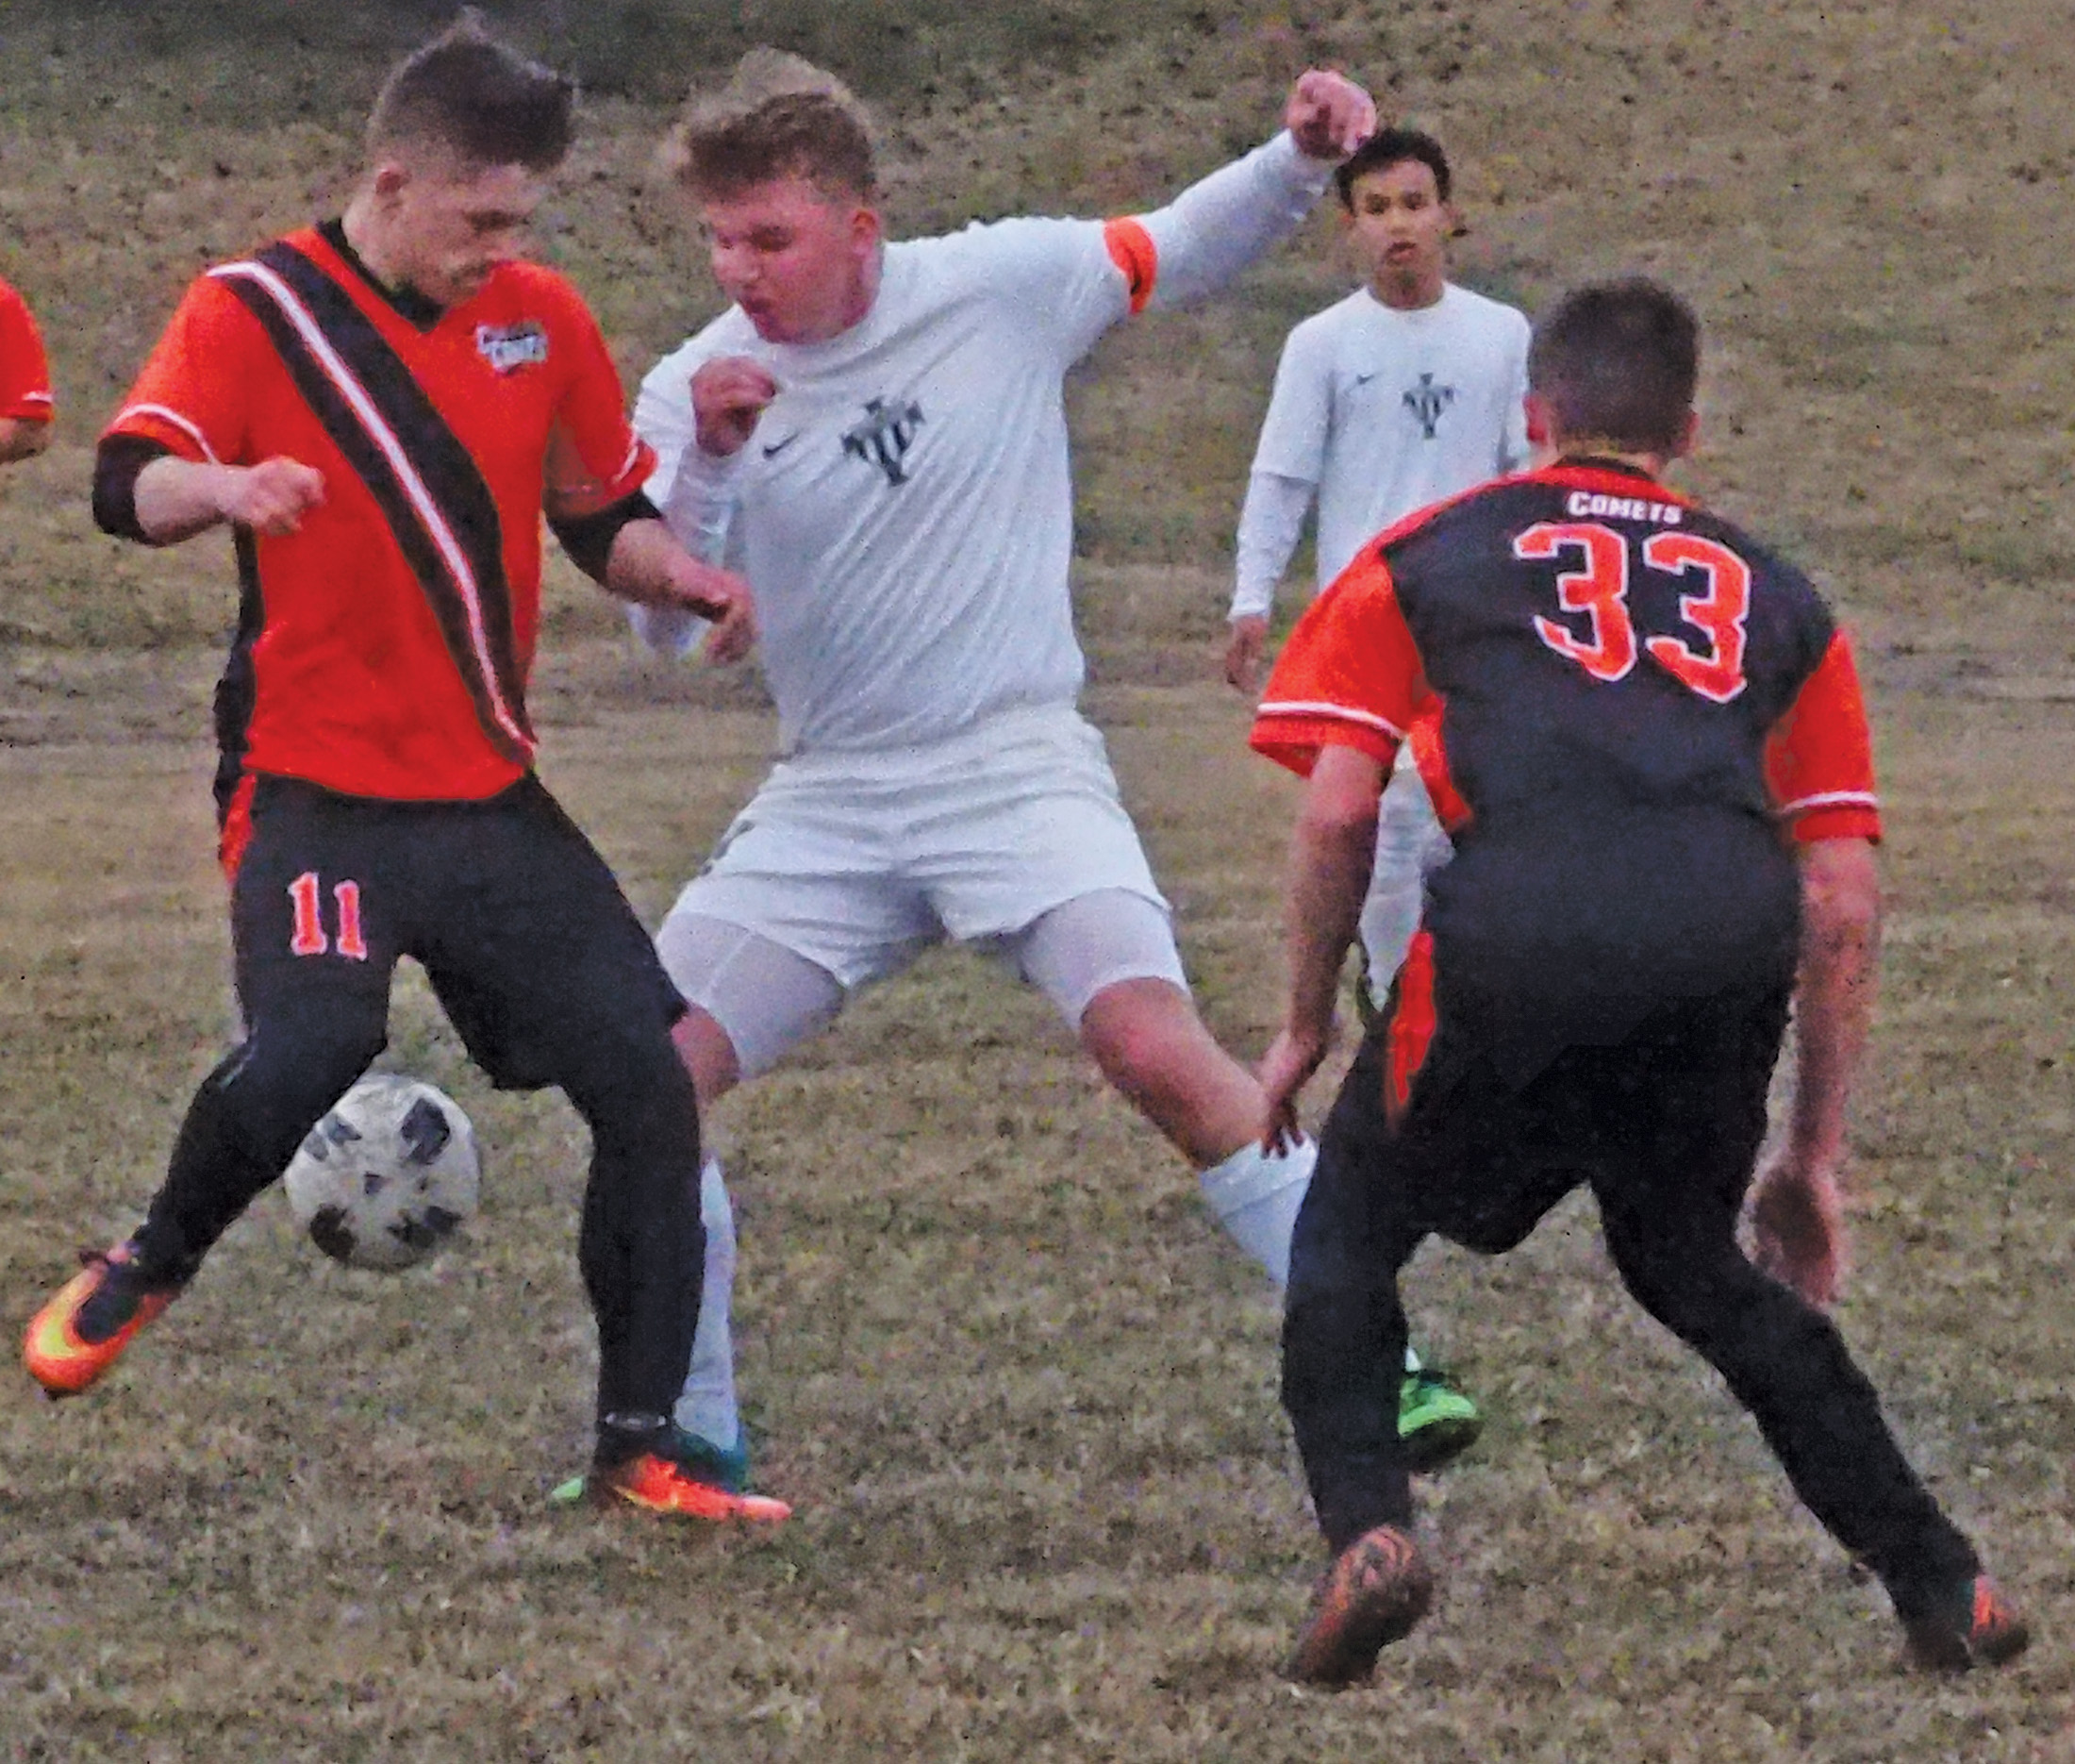 Comet soccer team loses ‘maiden voyage’ to Sailors, 6-0